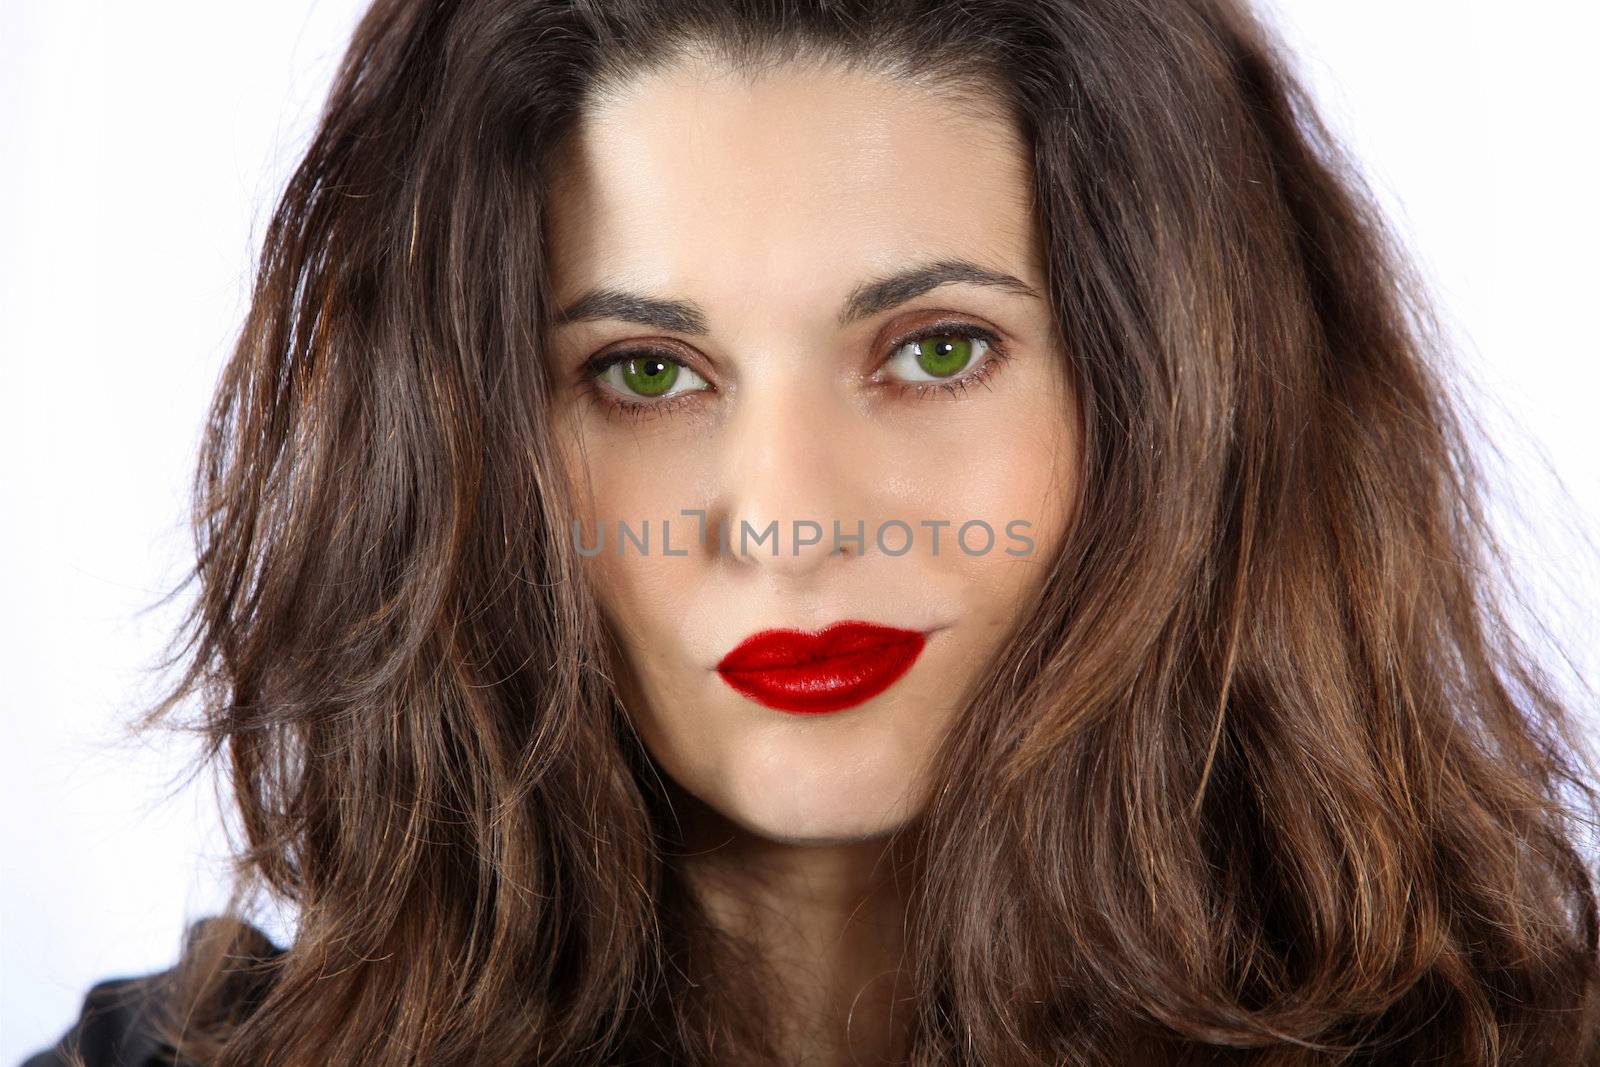 Beautiful, cool woman with green eyes and red lips